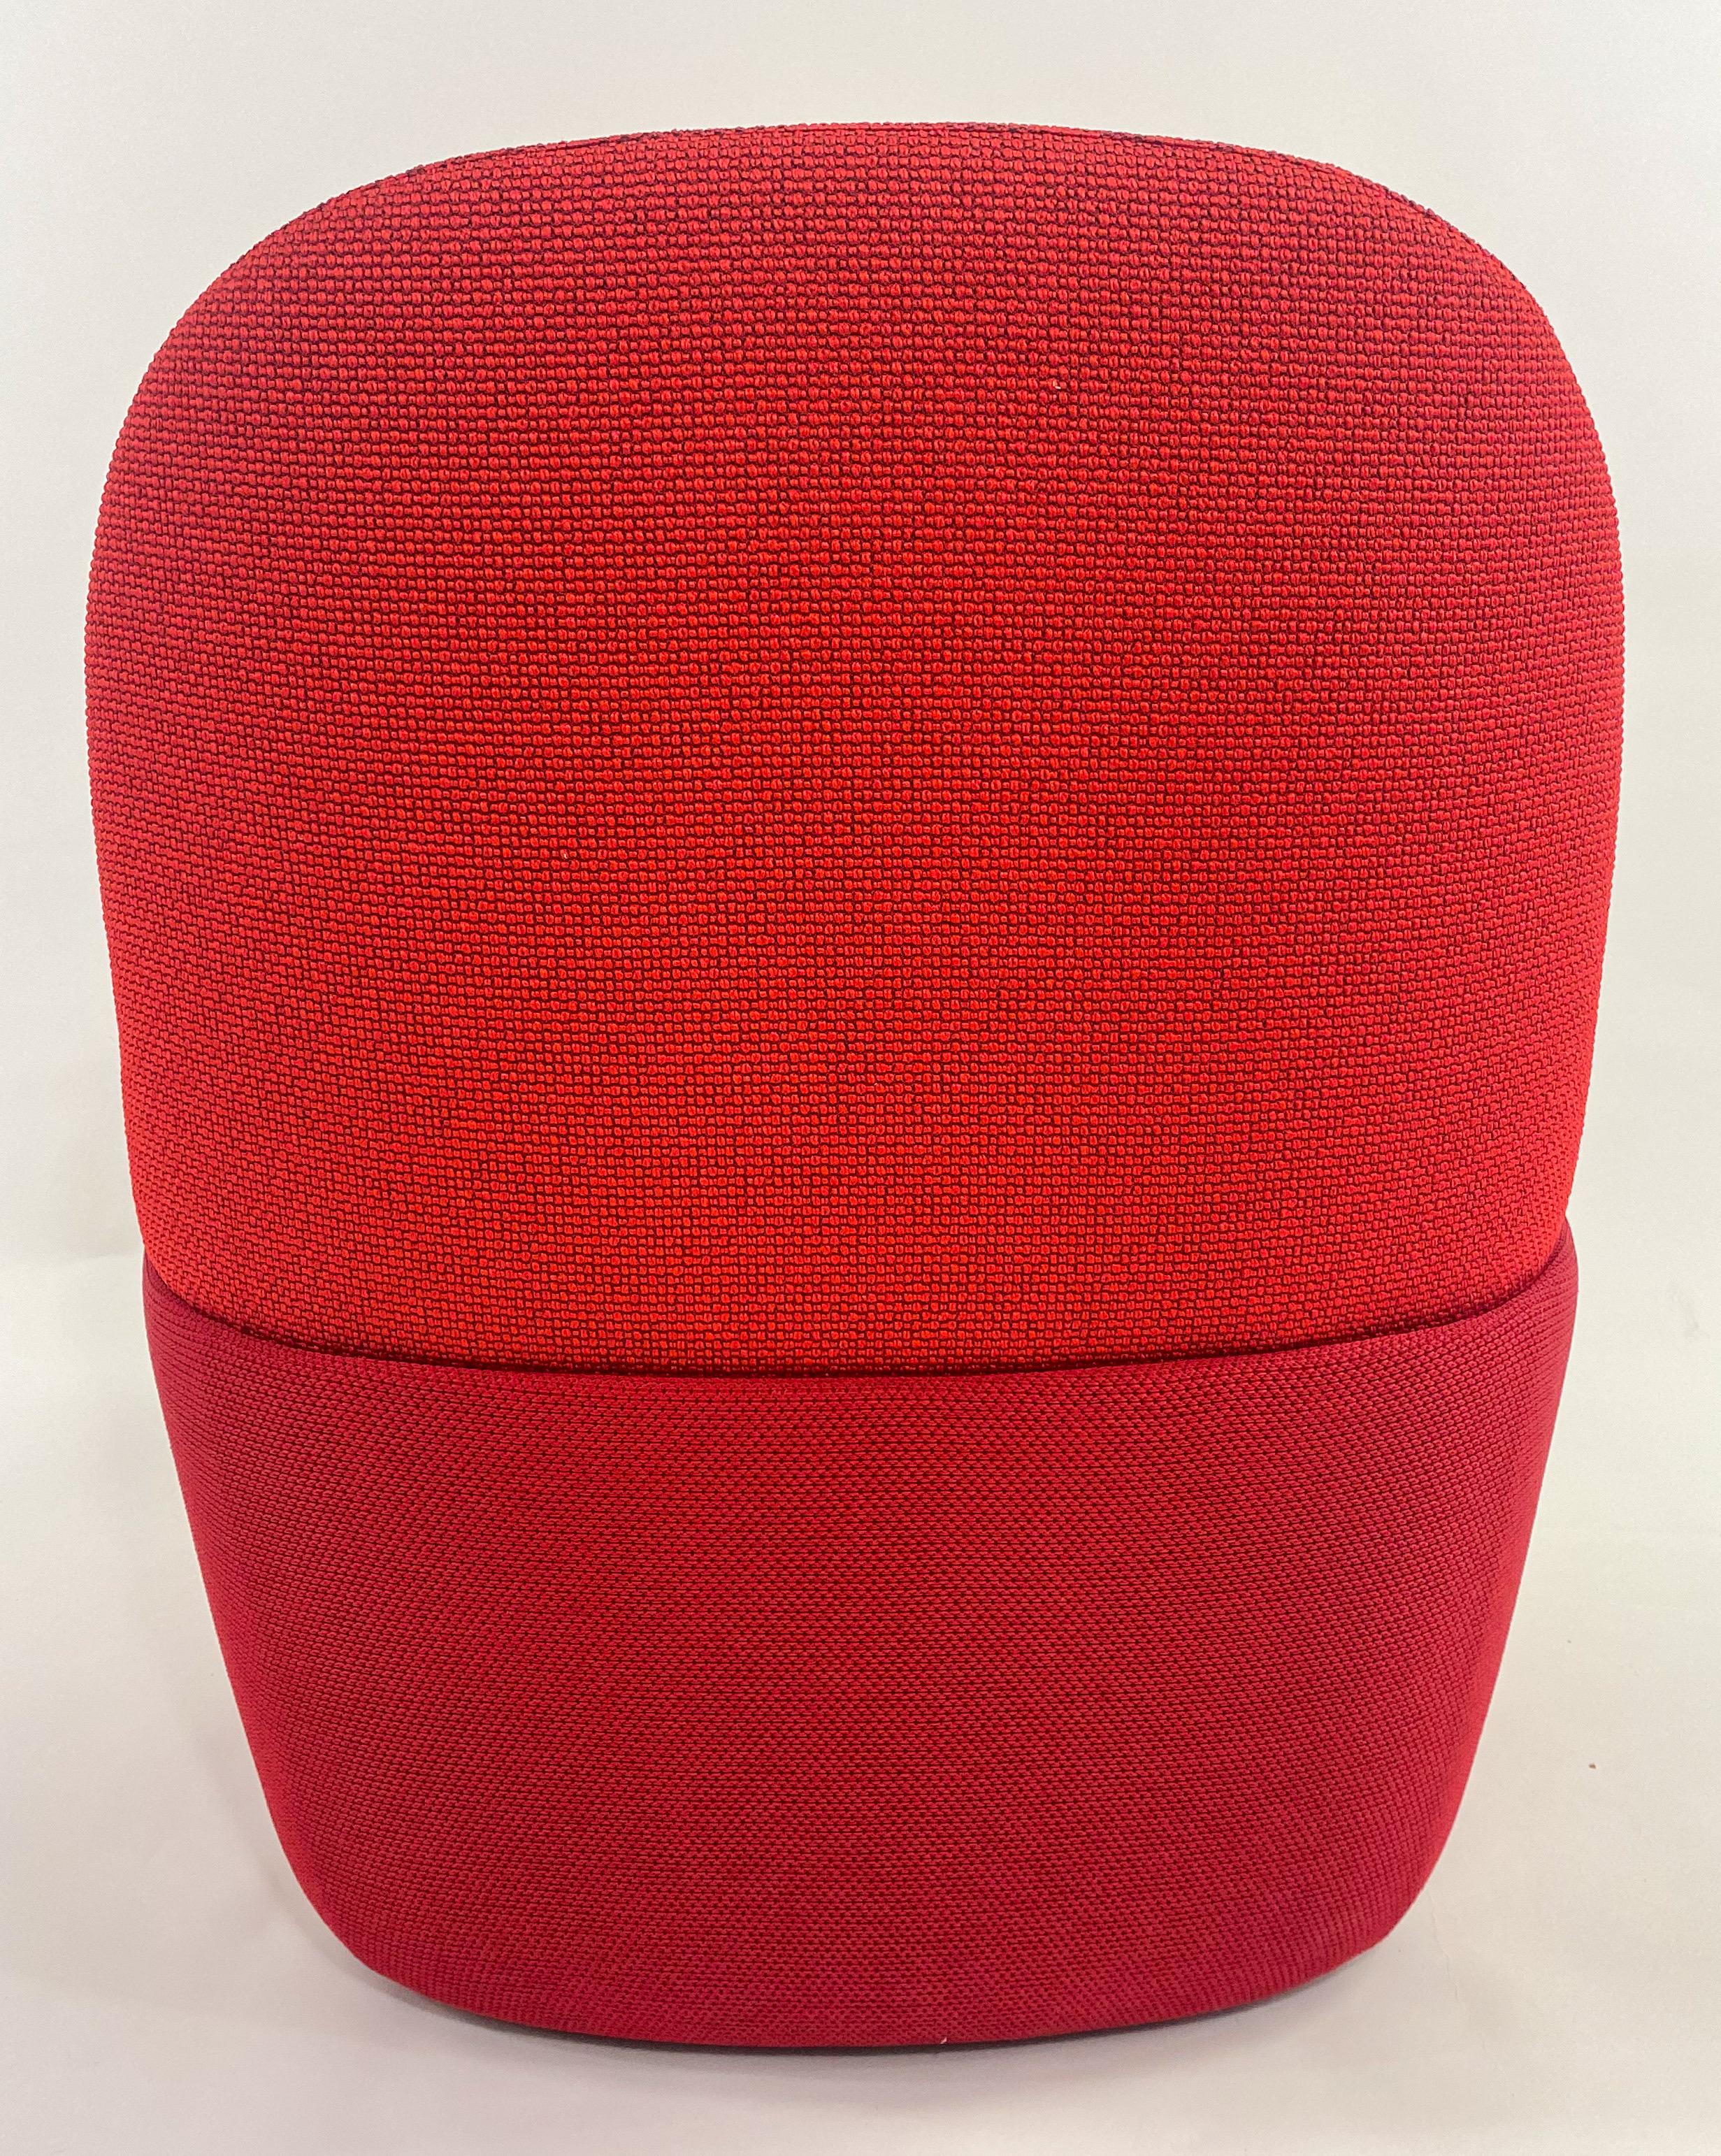 Modern Studio TK Custom Red Knit Fabric Slipper Chair or Pouf with Back, a Pair  For Sale 6